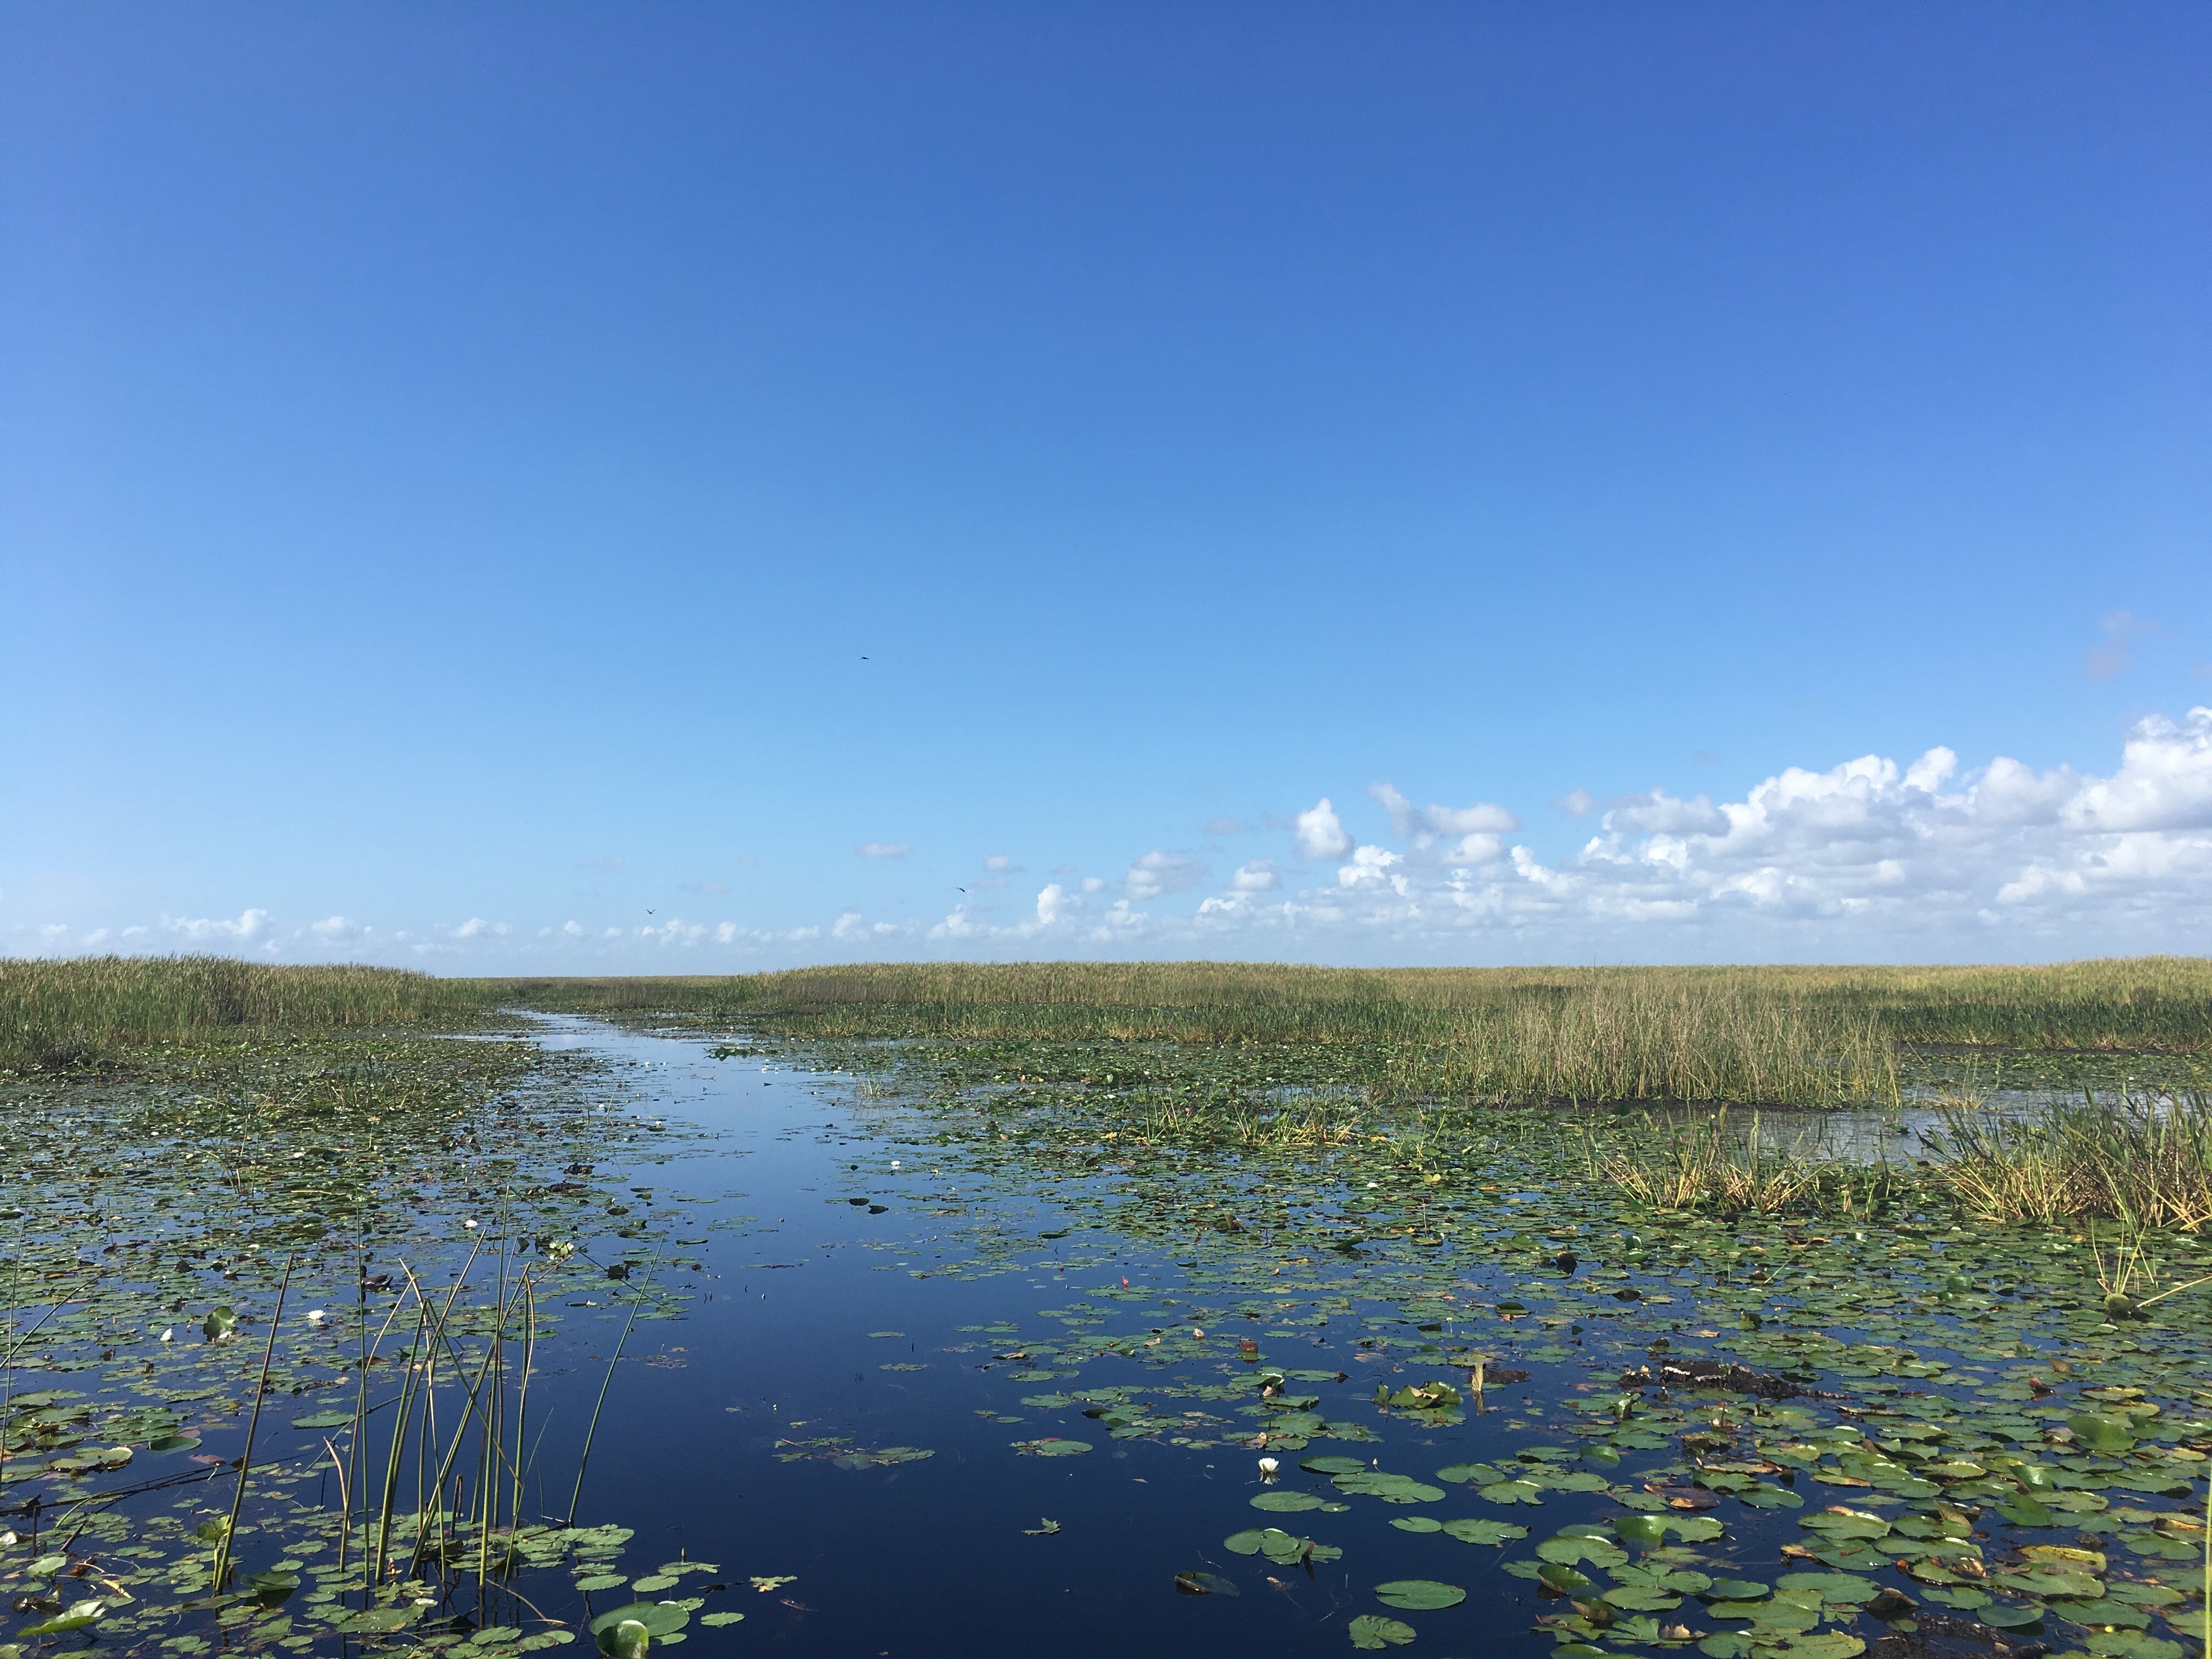 A photo of water surrounded by aquatic plants under a blue sky - Lake Okeechobee.